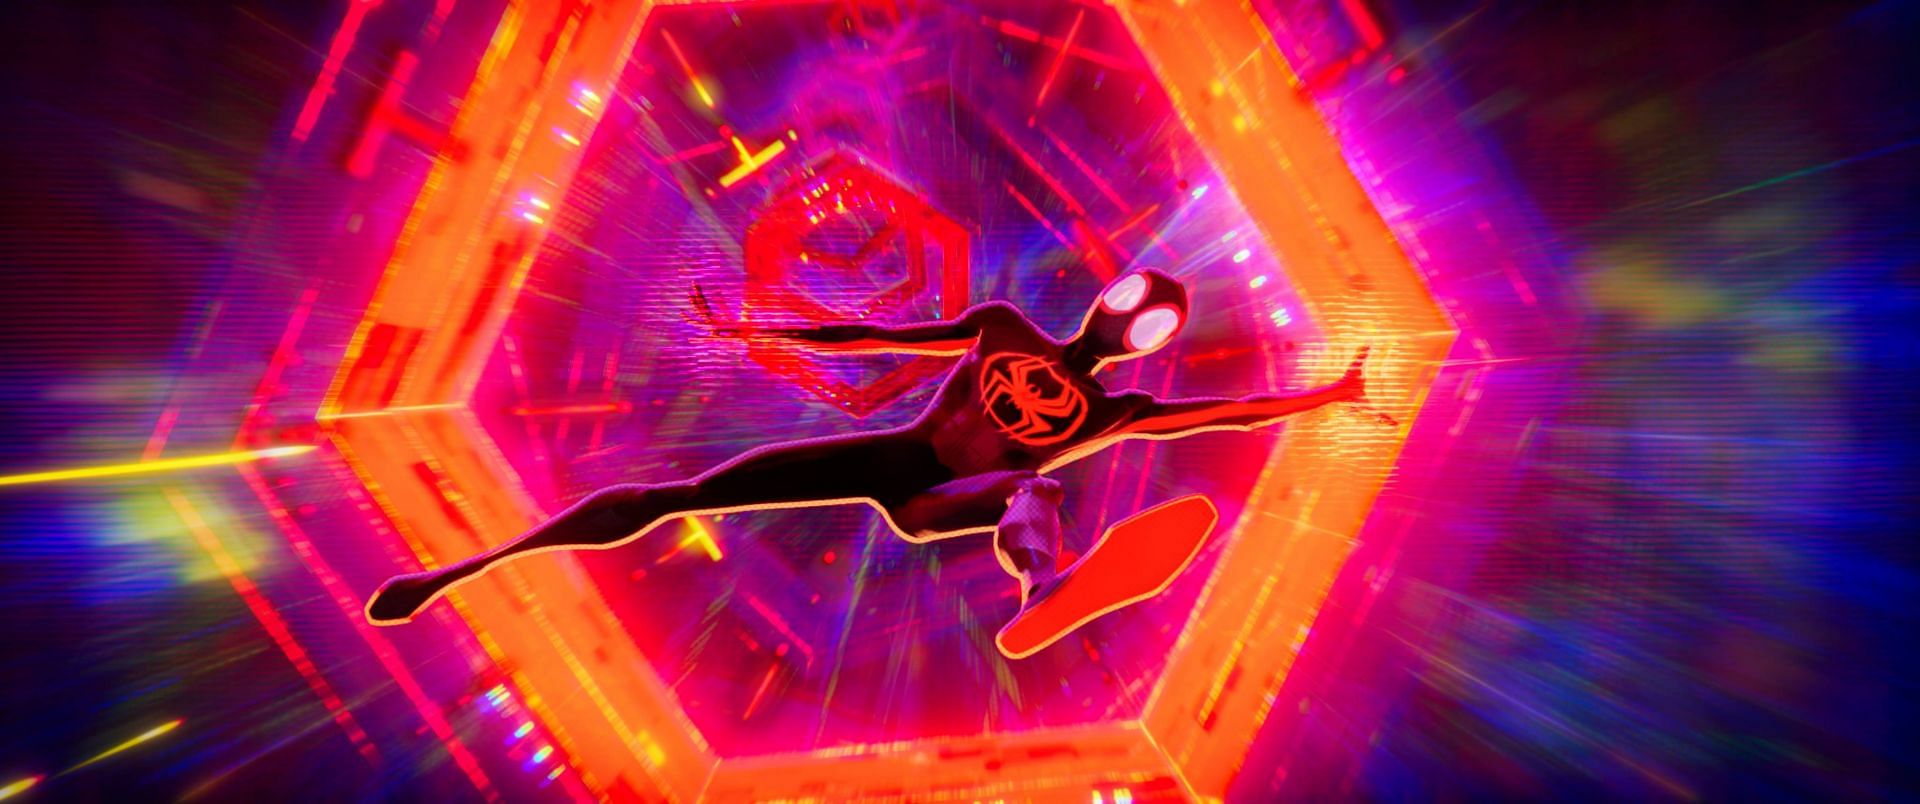 Unraveling the web: 10 easter eggs in Spider-Man: Across the Spider-Verse trailer (Image via Sony Pictures)